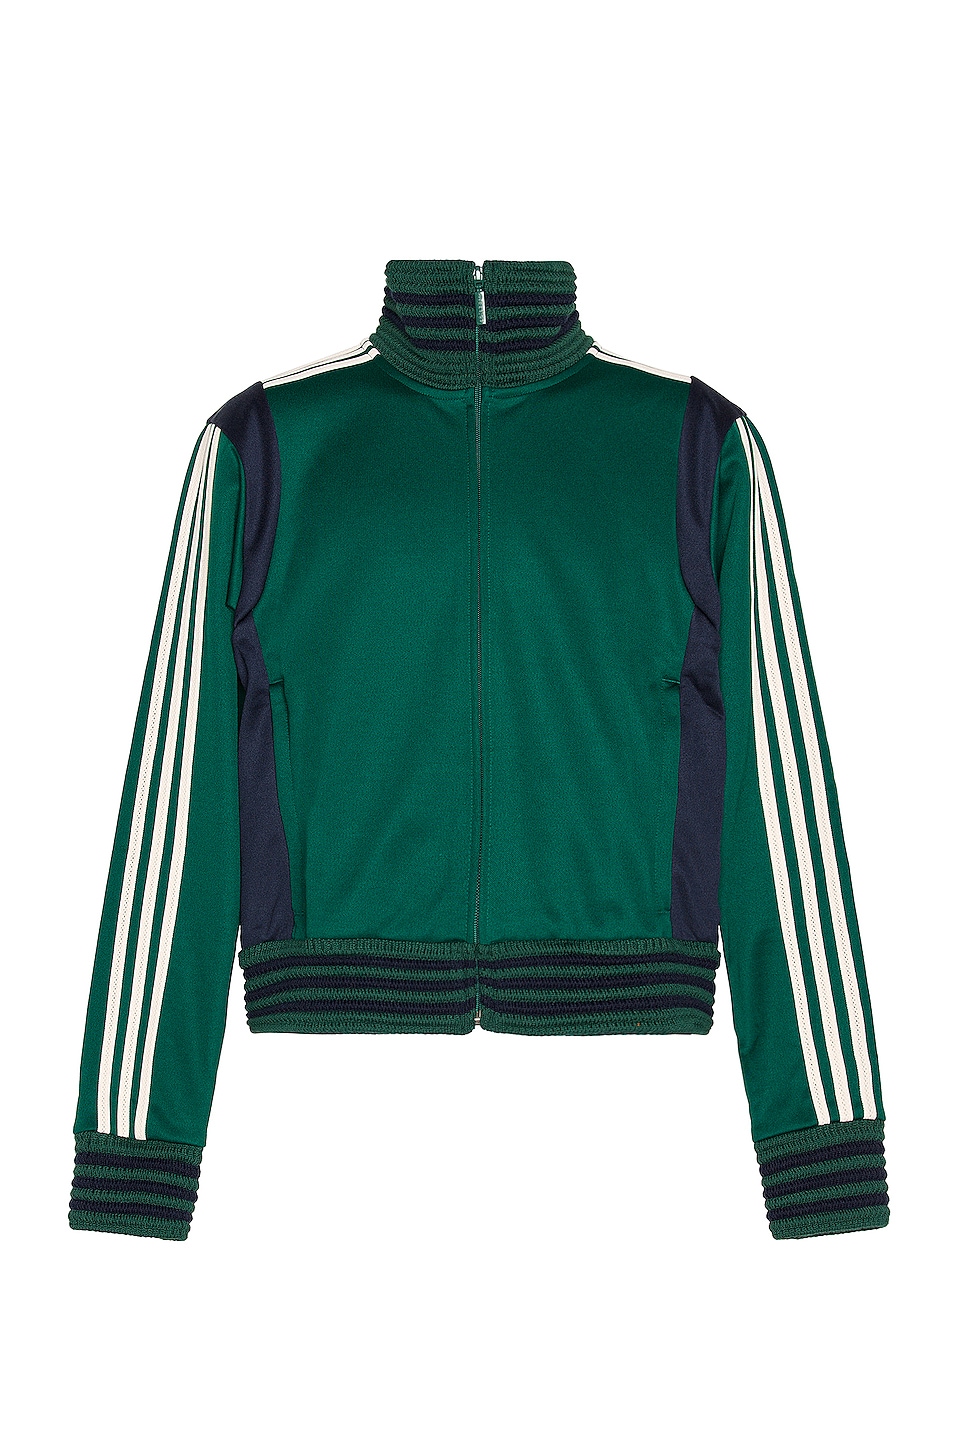 adidas by Wales Bonner Lovers Track Jacket in Collegiate Green | REVOLVE